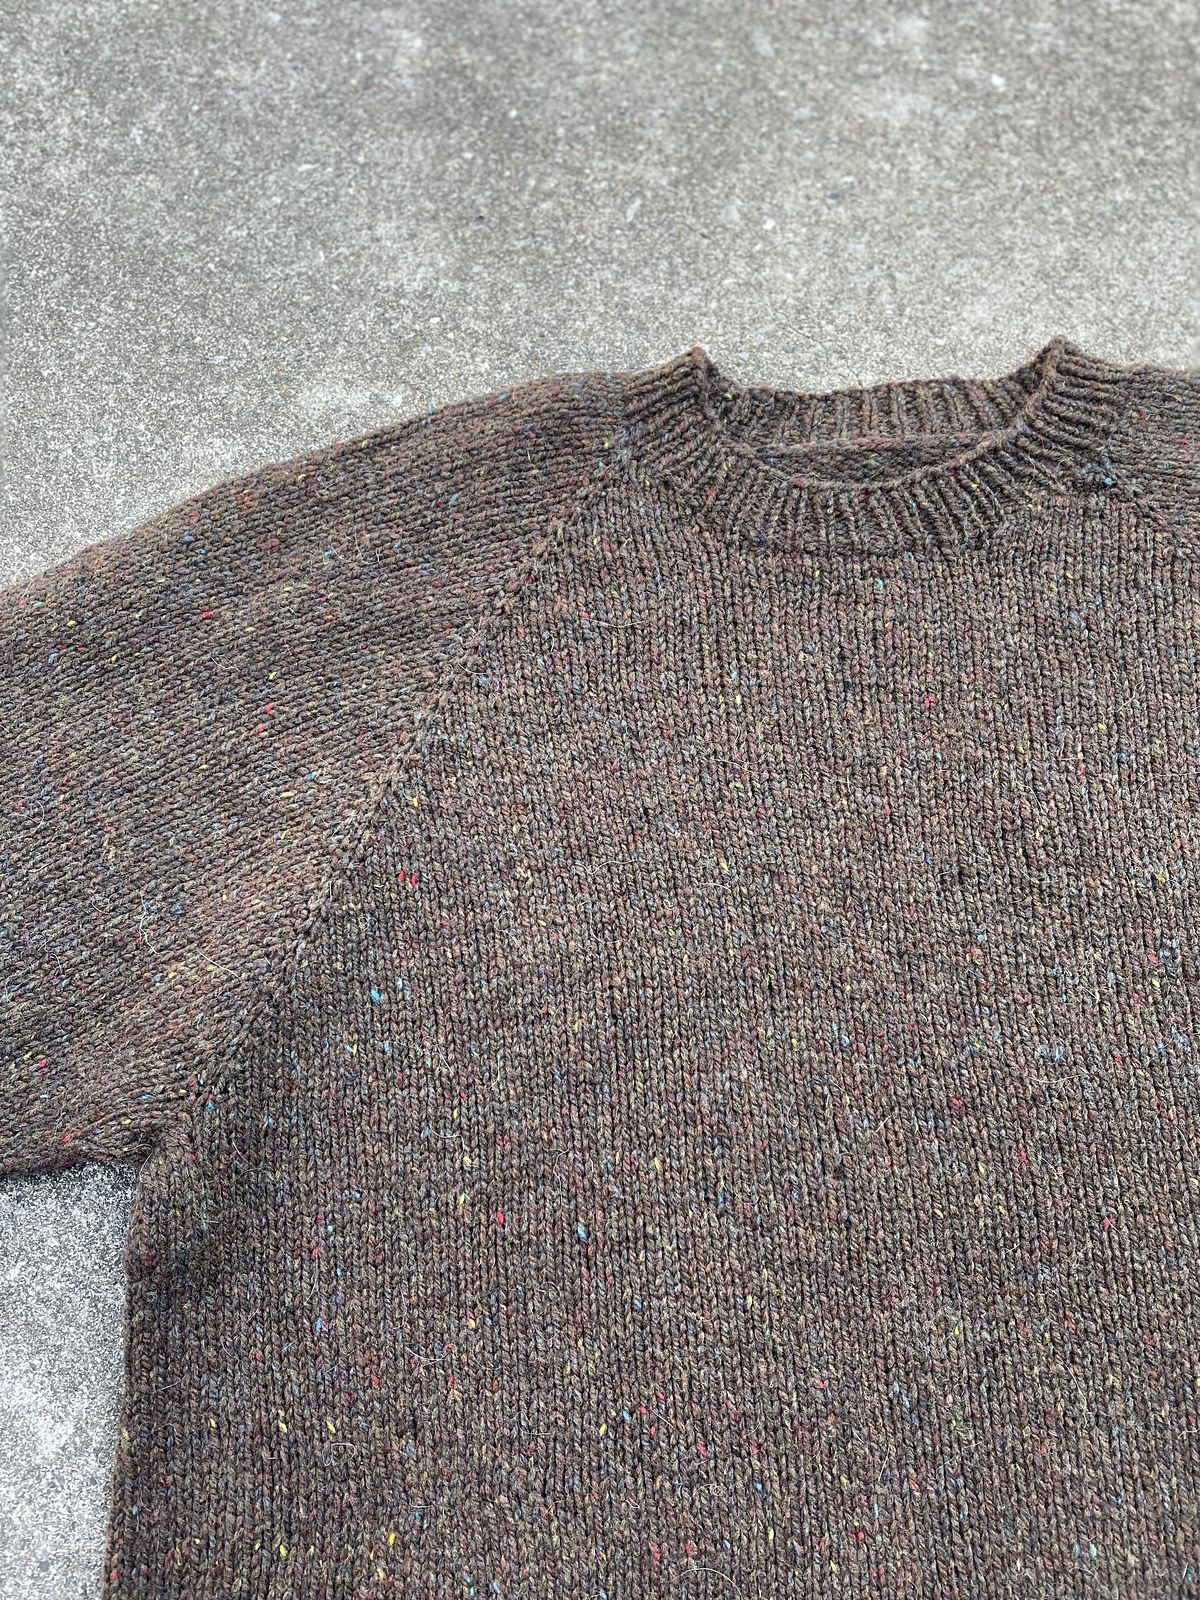 close up view of brown men's pullover sweater